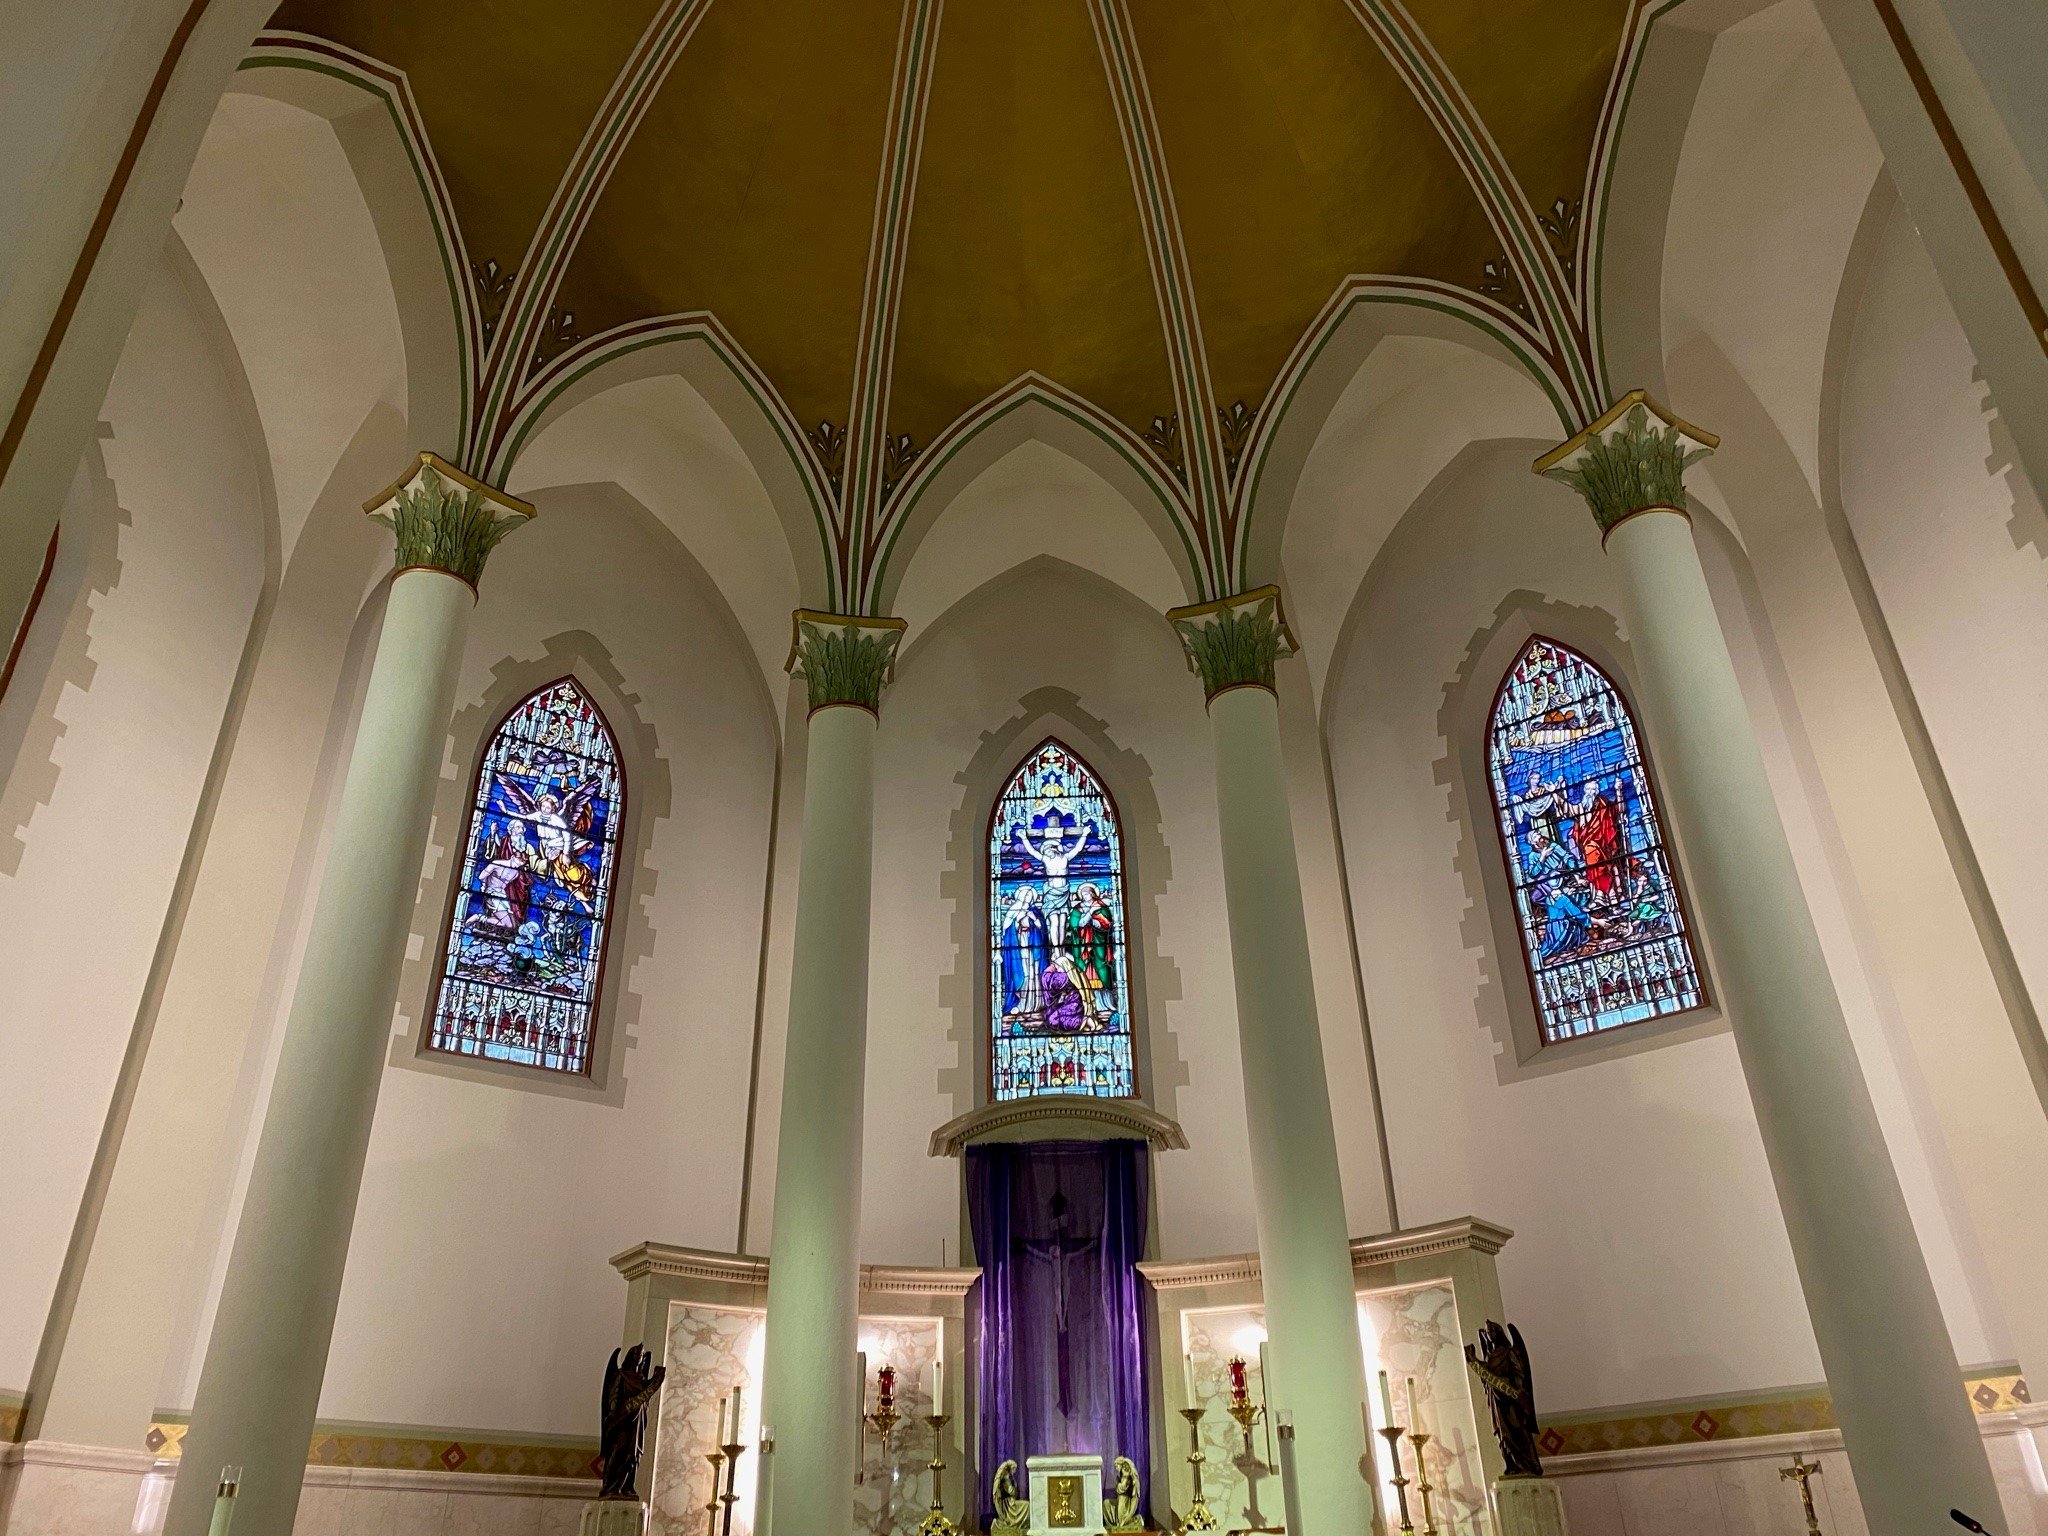 Inside view of the altar and windows